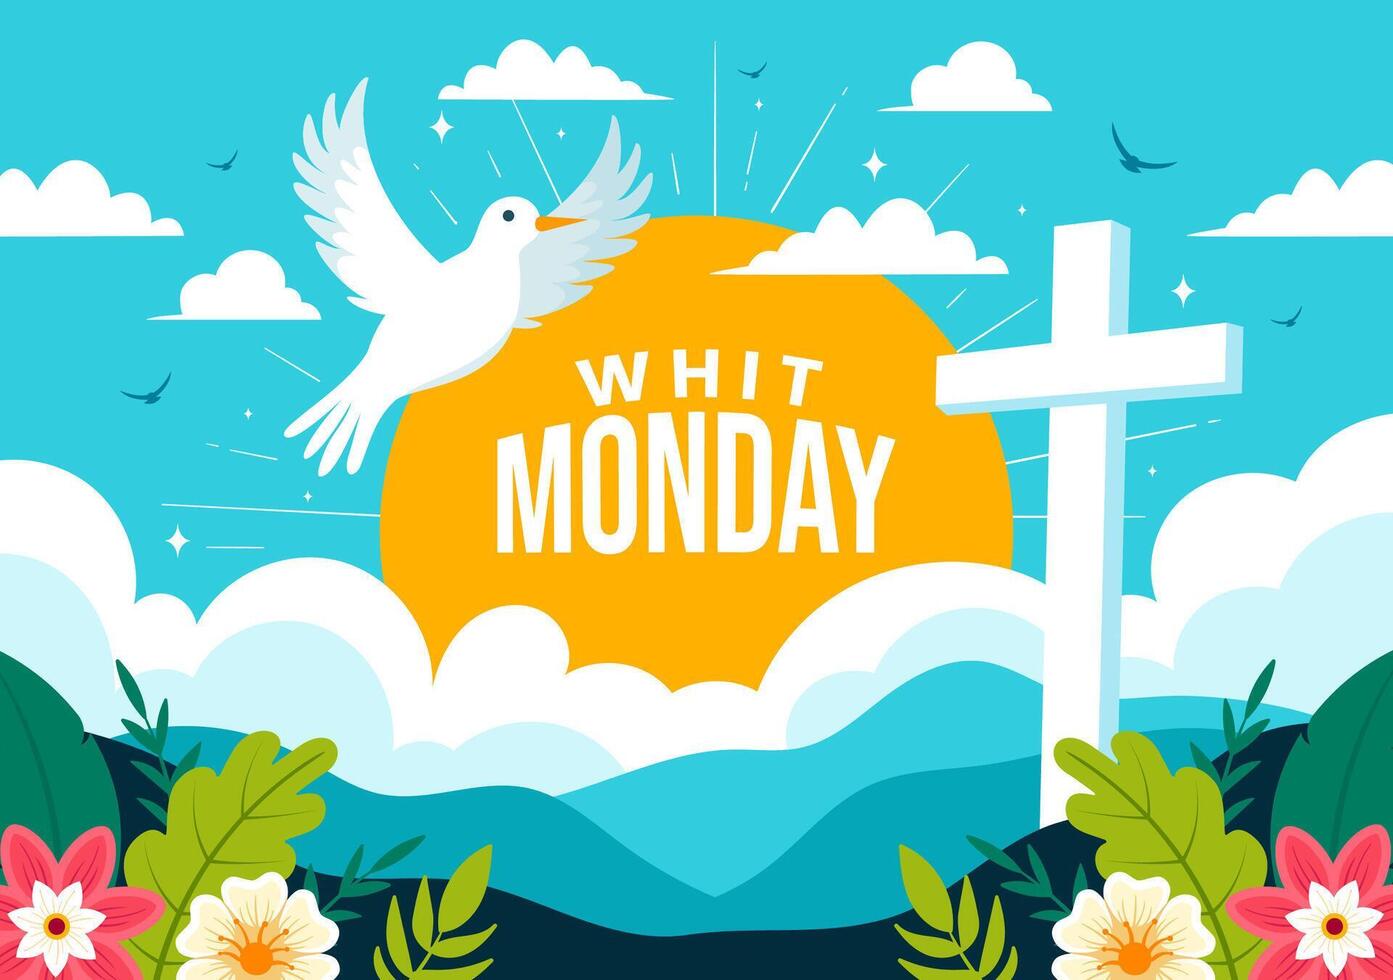 Whit Monday Vector Illustration with a Pigeon or Dove for Christian Community Holiday of the Holy Spirit in Flat Cartoon Background Design